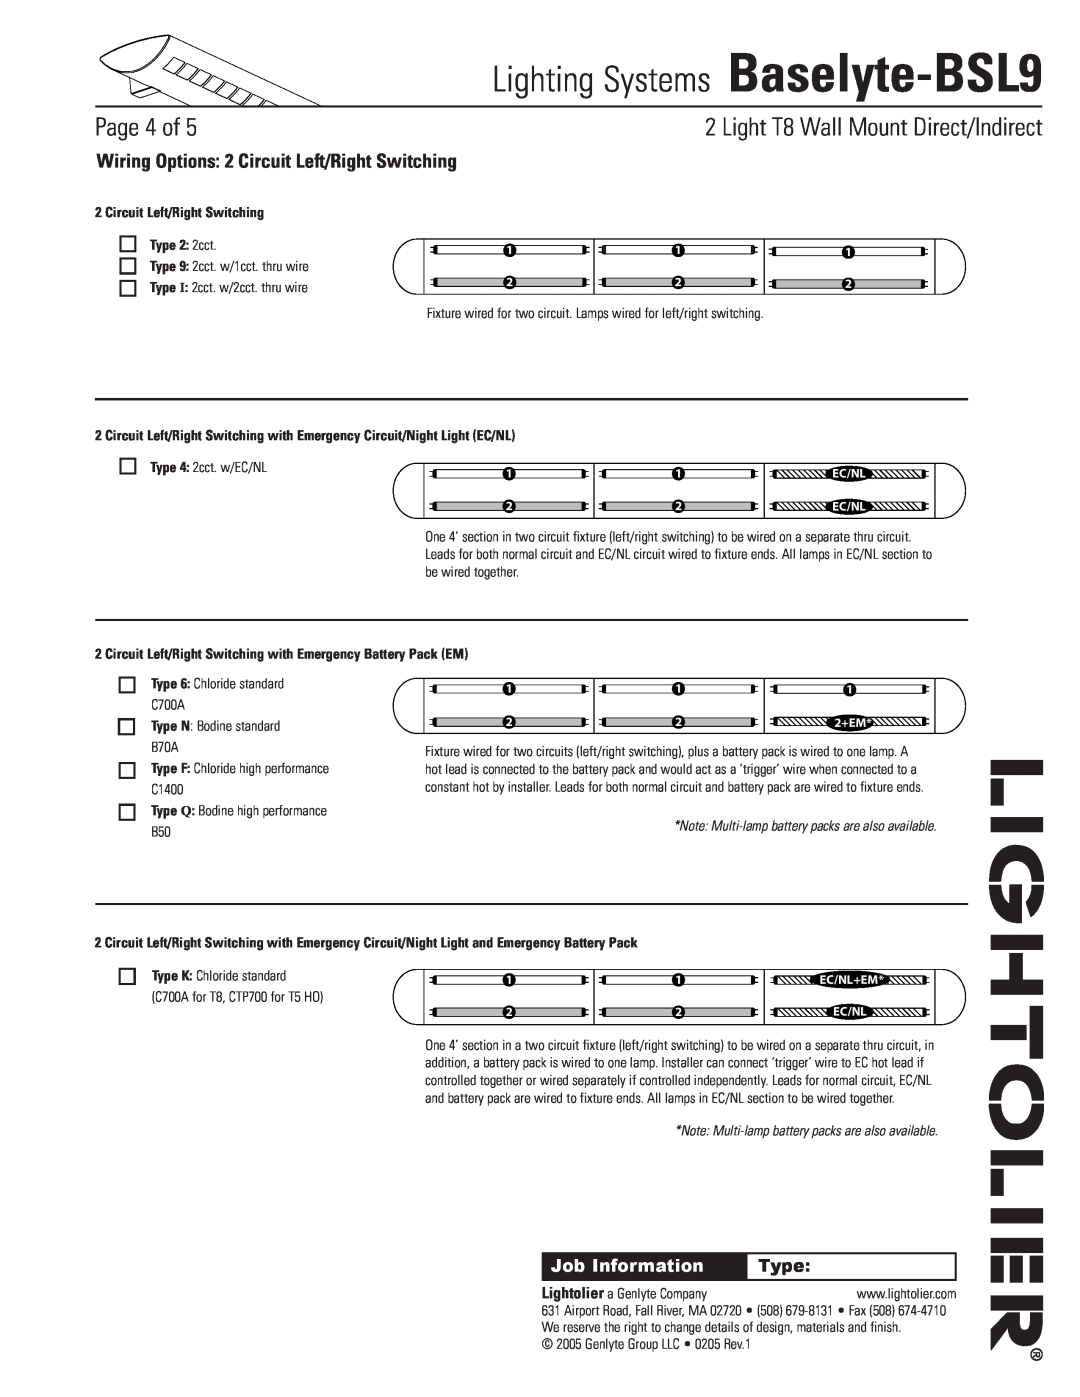 Lightolier Lighting Systems Baselyte-BSL9, Wiring Options 2 Circuit Left/Right Switching, Page of, Job Information 